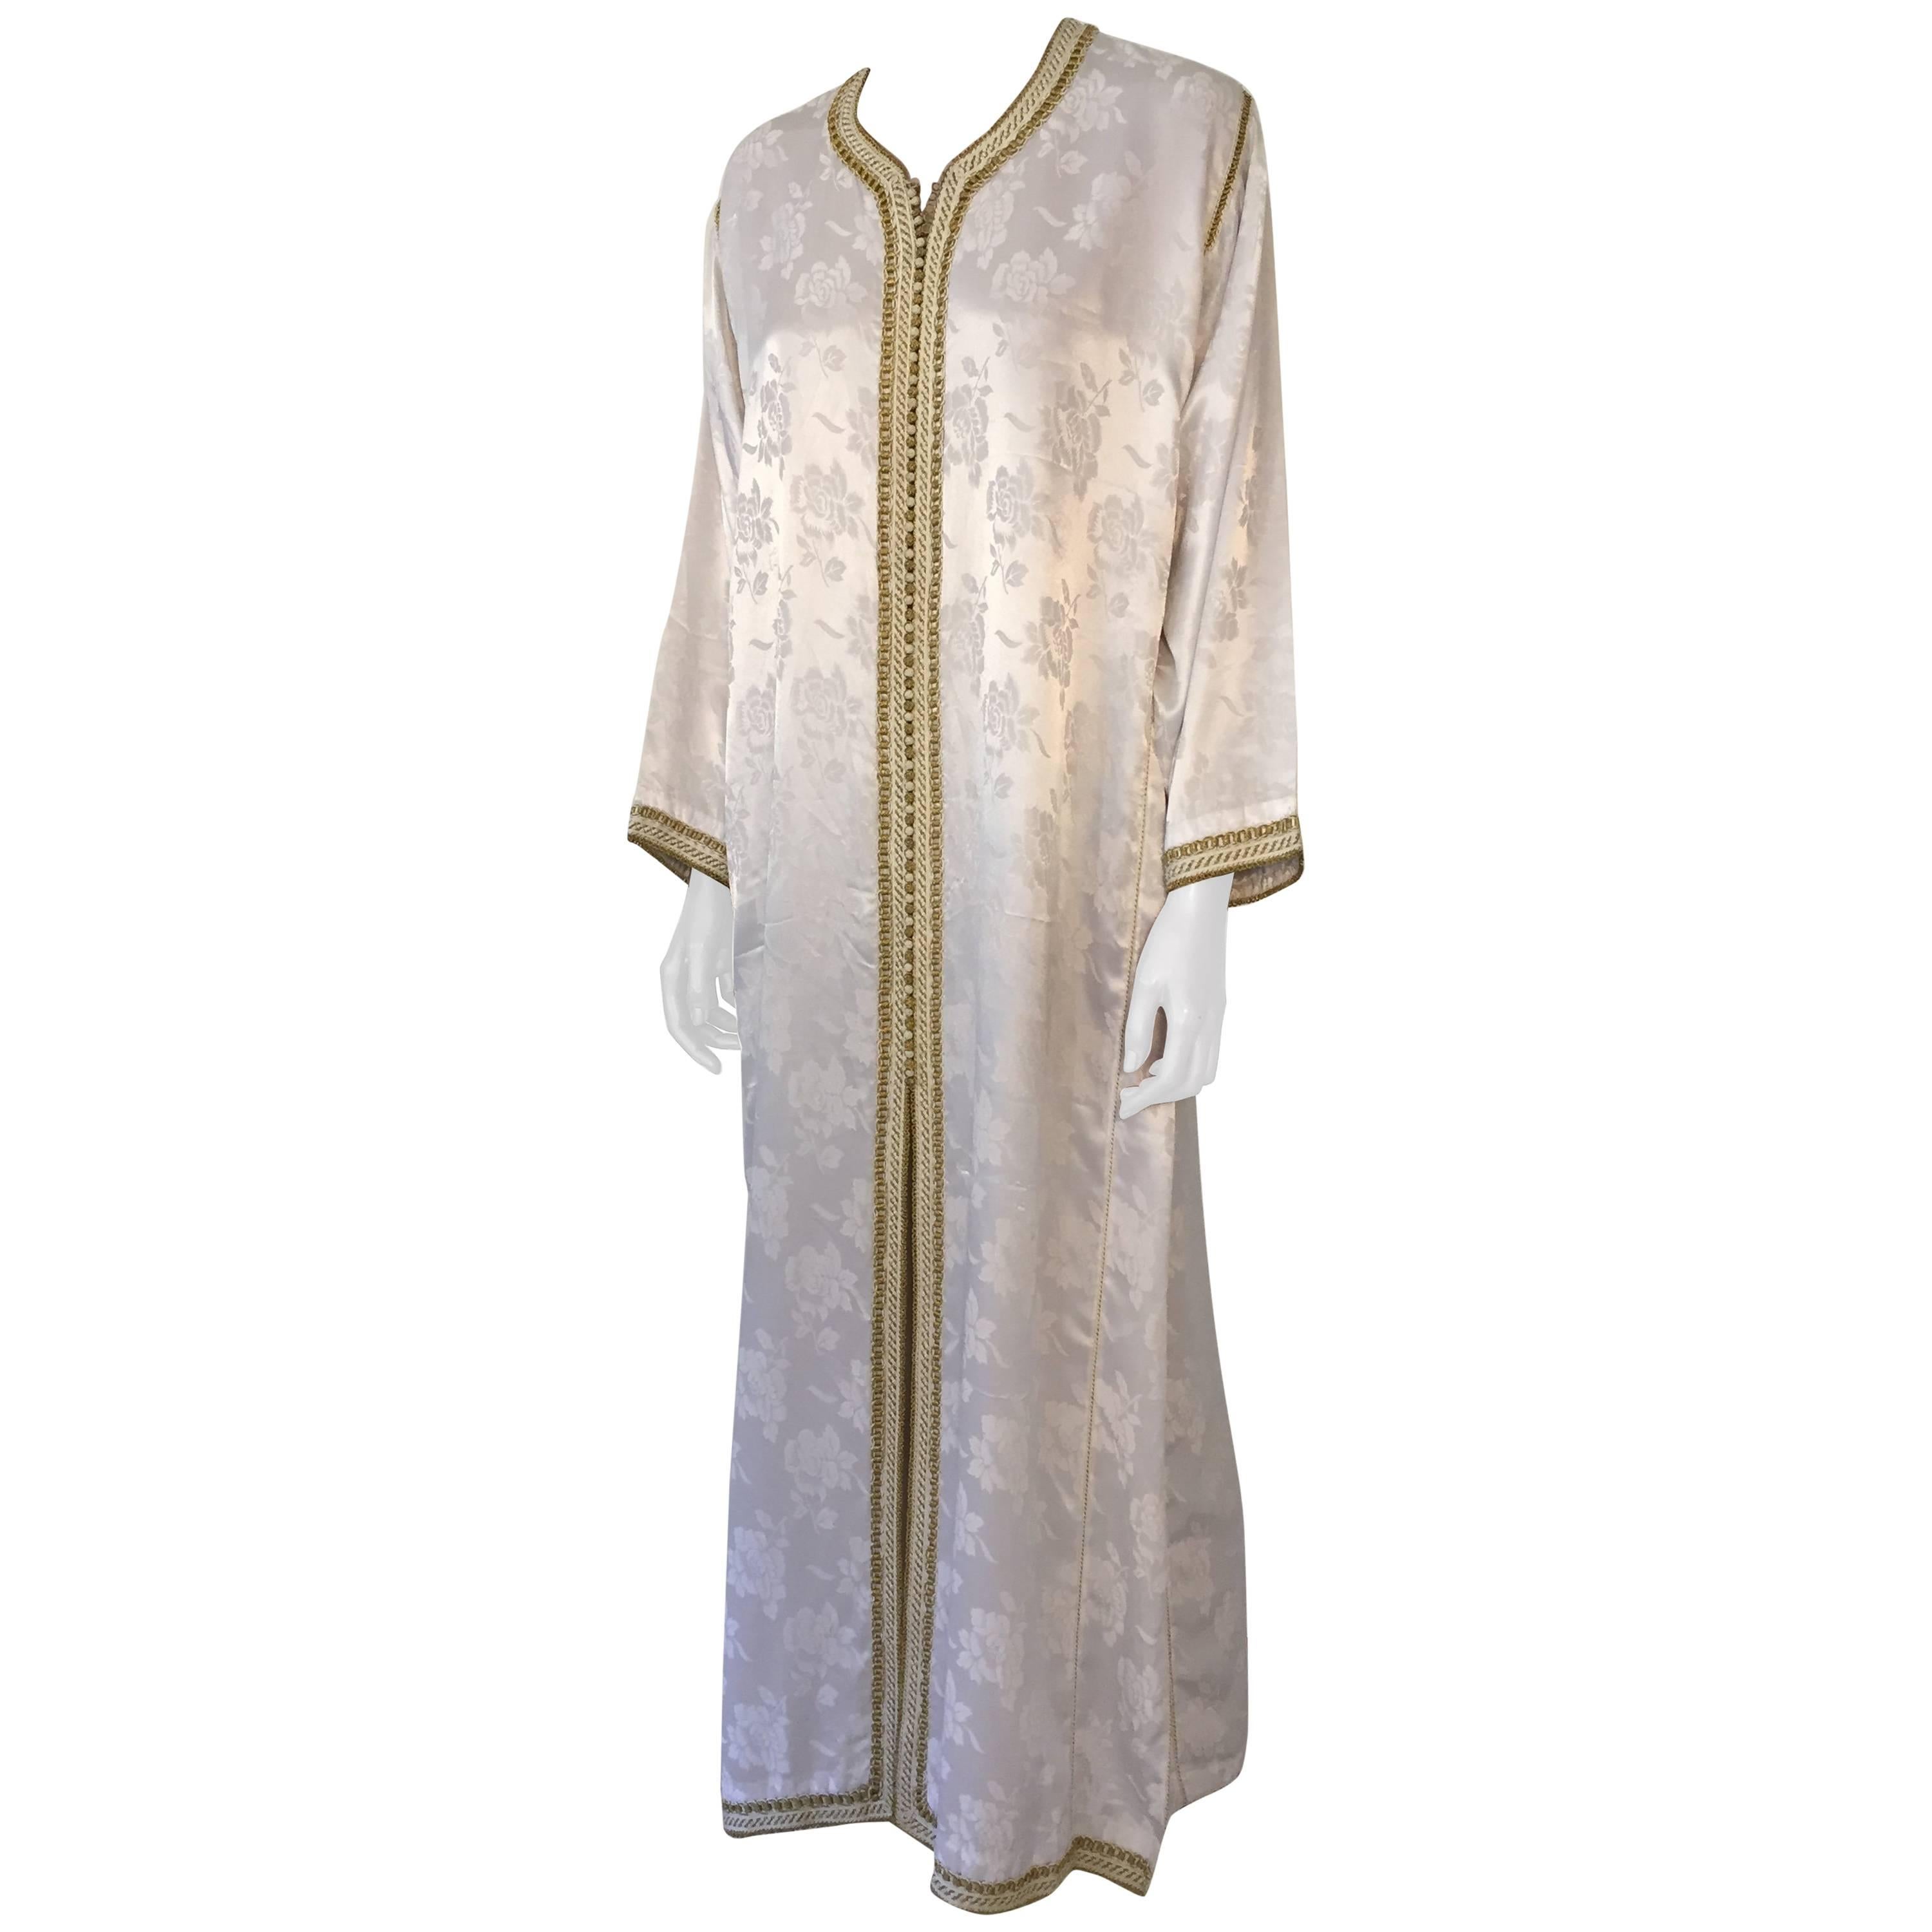 Moroccan Caftan Gown White Embroidered with Gold Trim, circa 1970 For Sale